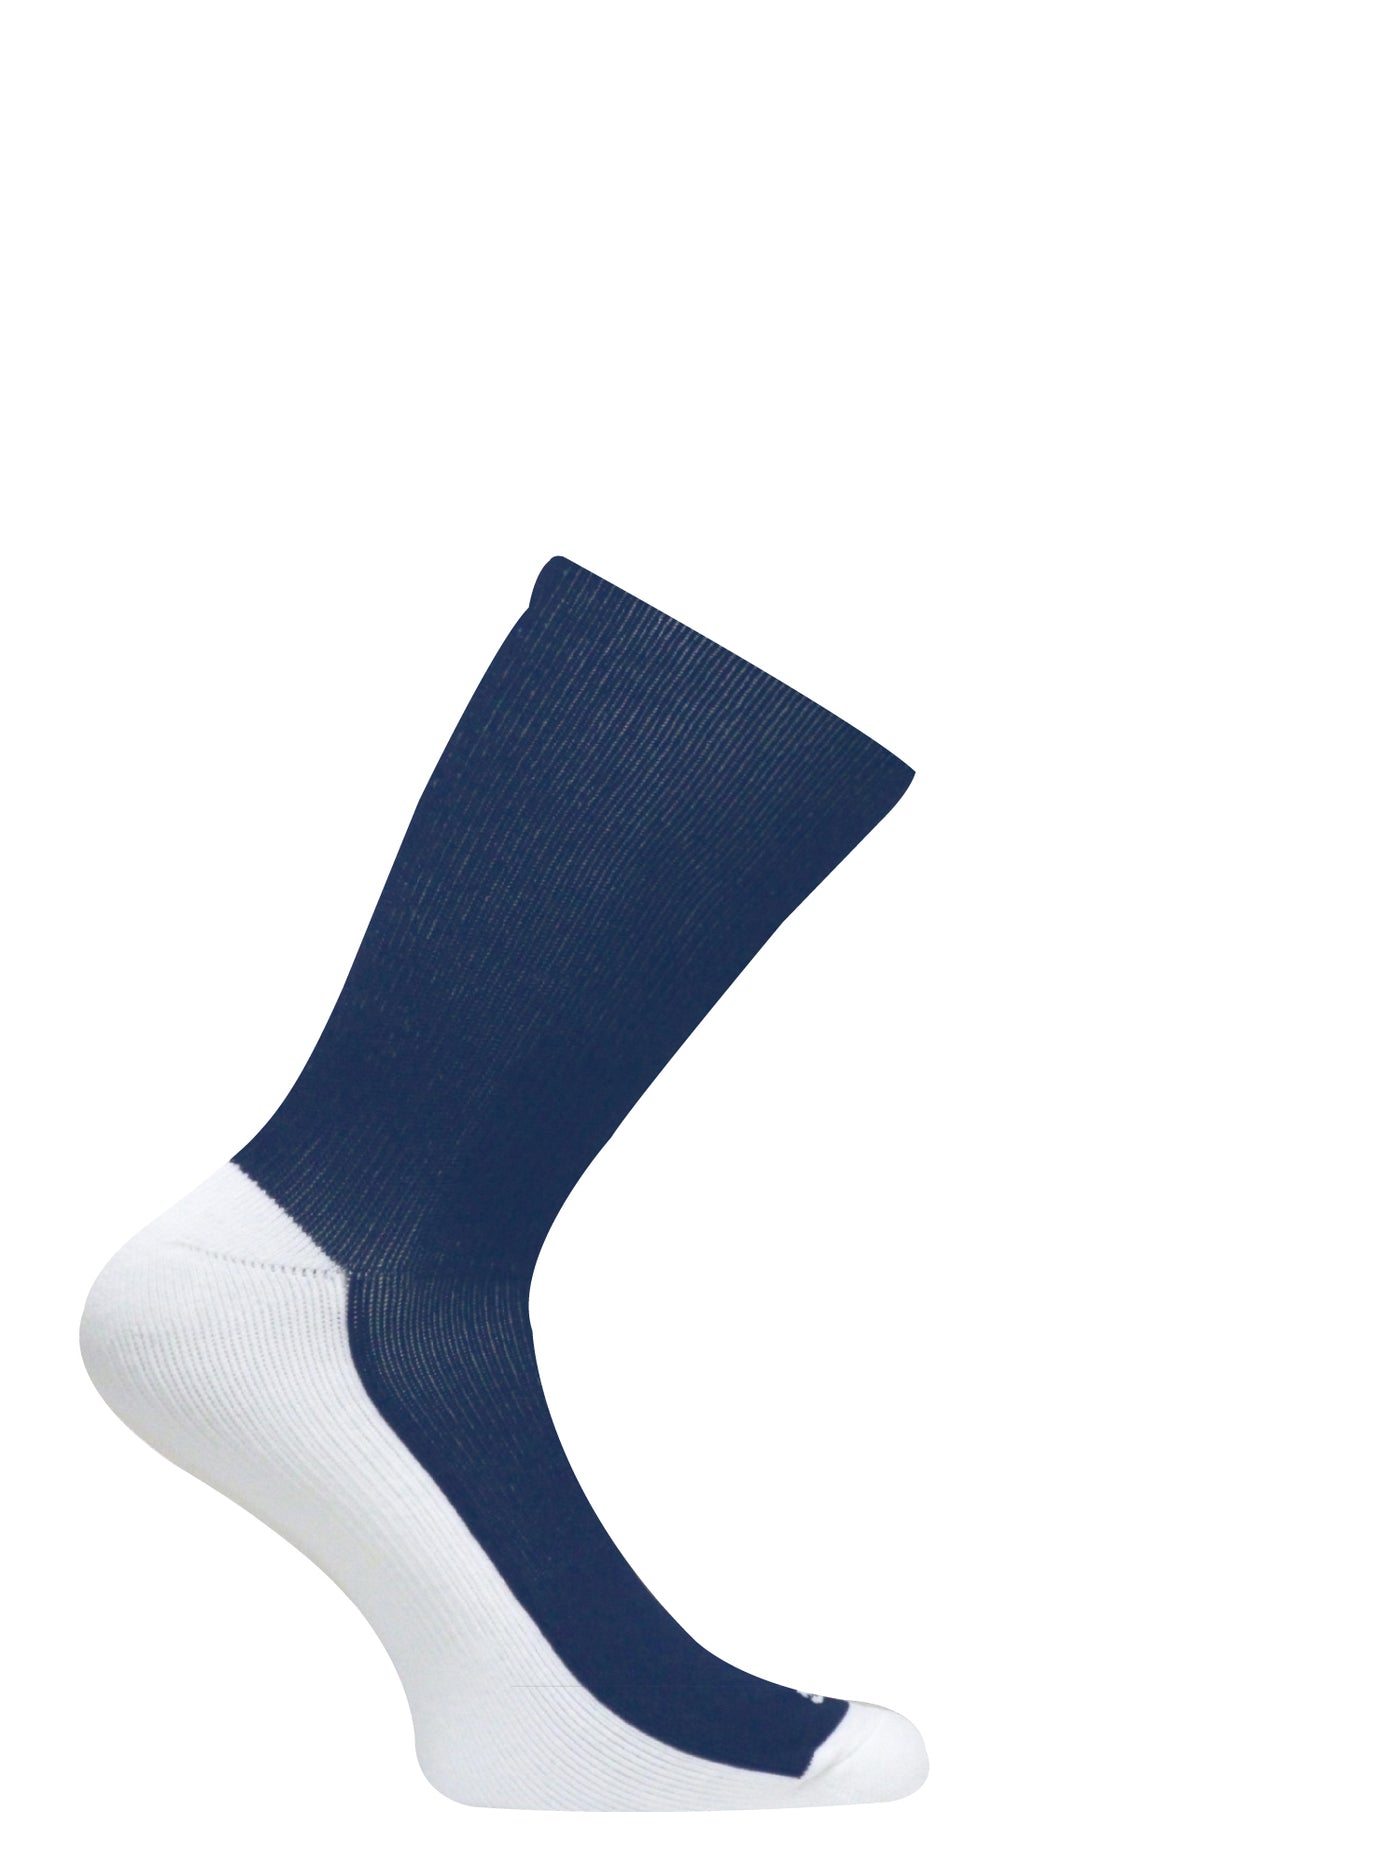 DIABETIC CREW FOOT AND ANKLE SUPPORT - SS5011 - Blue